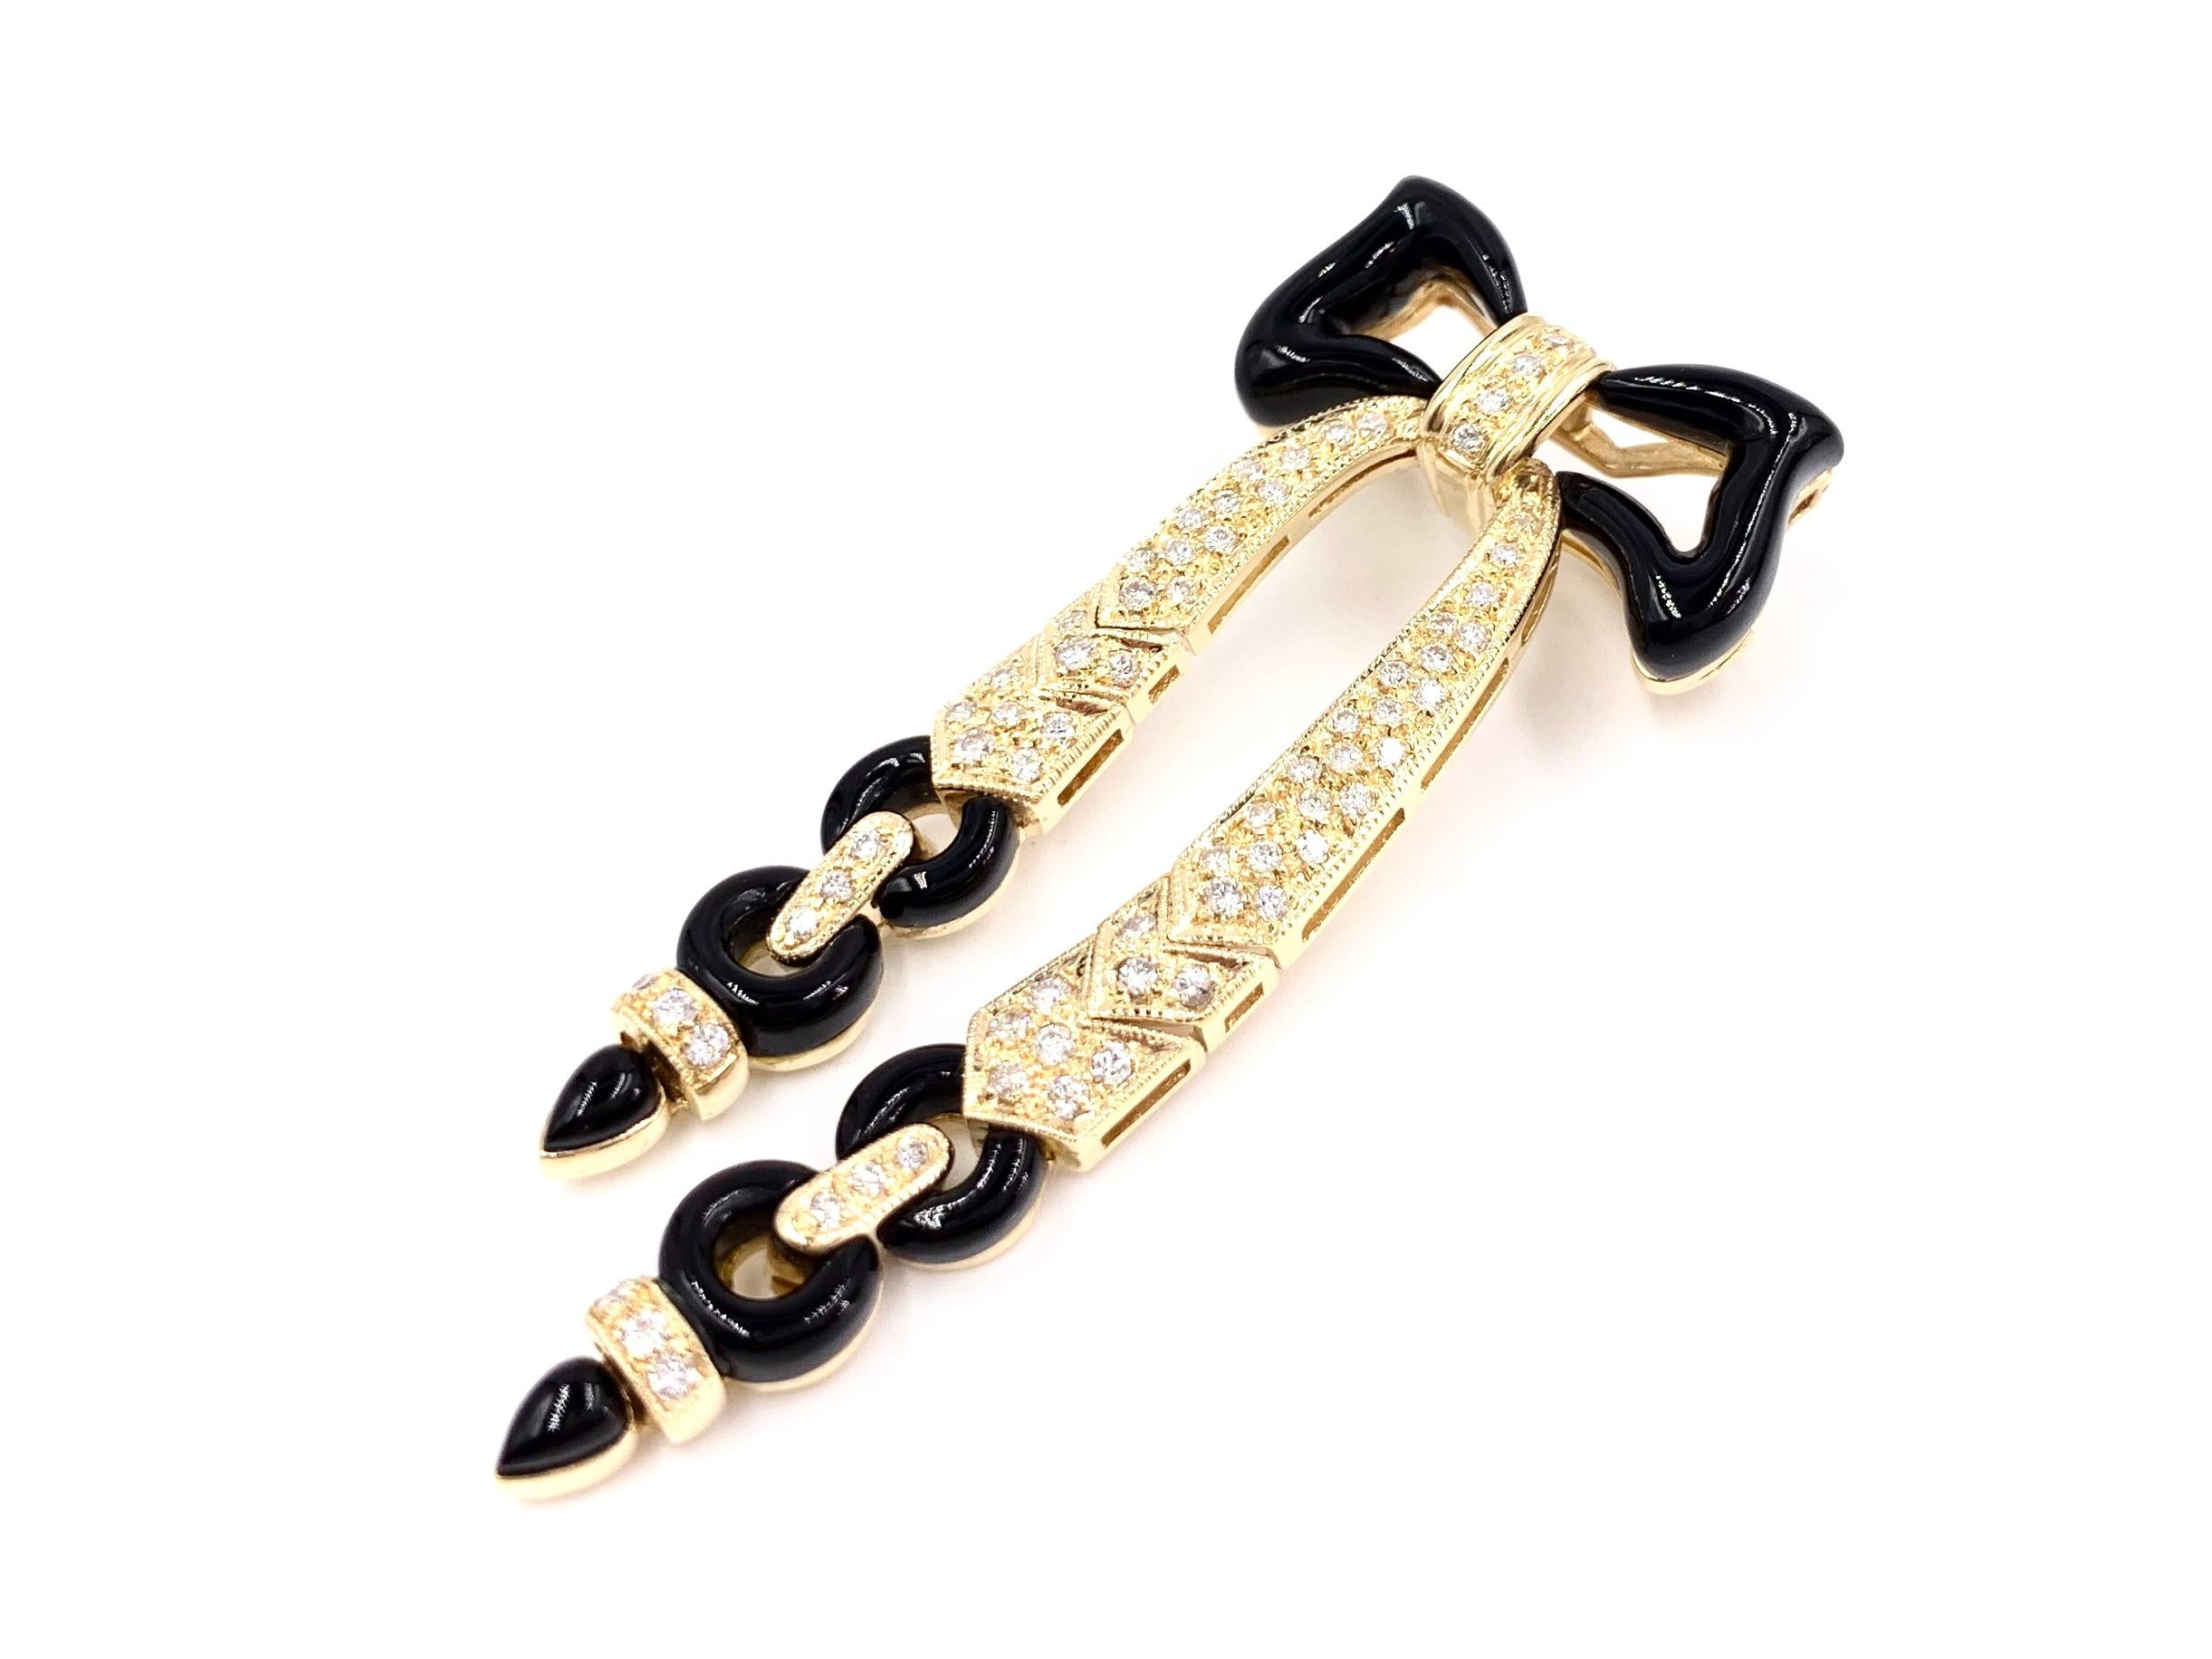 A beautiful 14 karat yellow gold Art Deco inspired bow brooch featuring polished, smooth black onyx and .97 carats of white diamonds. Diamond quality is approximately G color, VS2 clarity (near colorless, eye clean). Width of top section measures